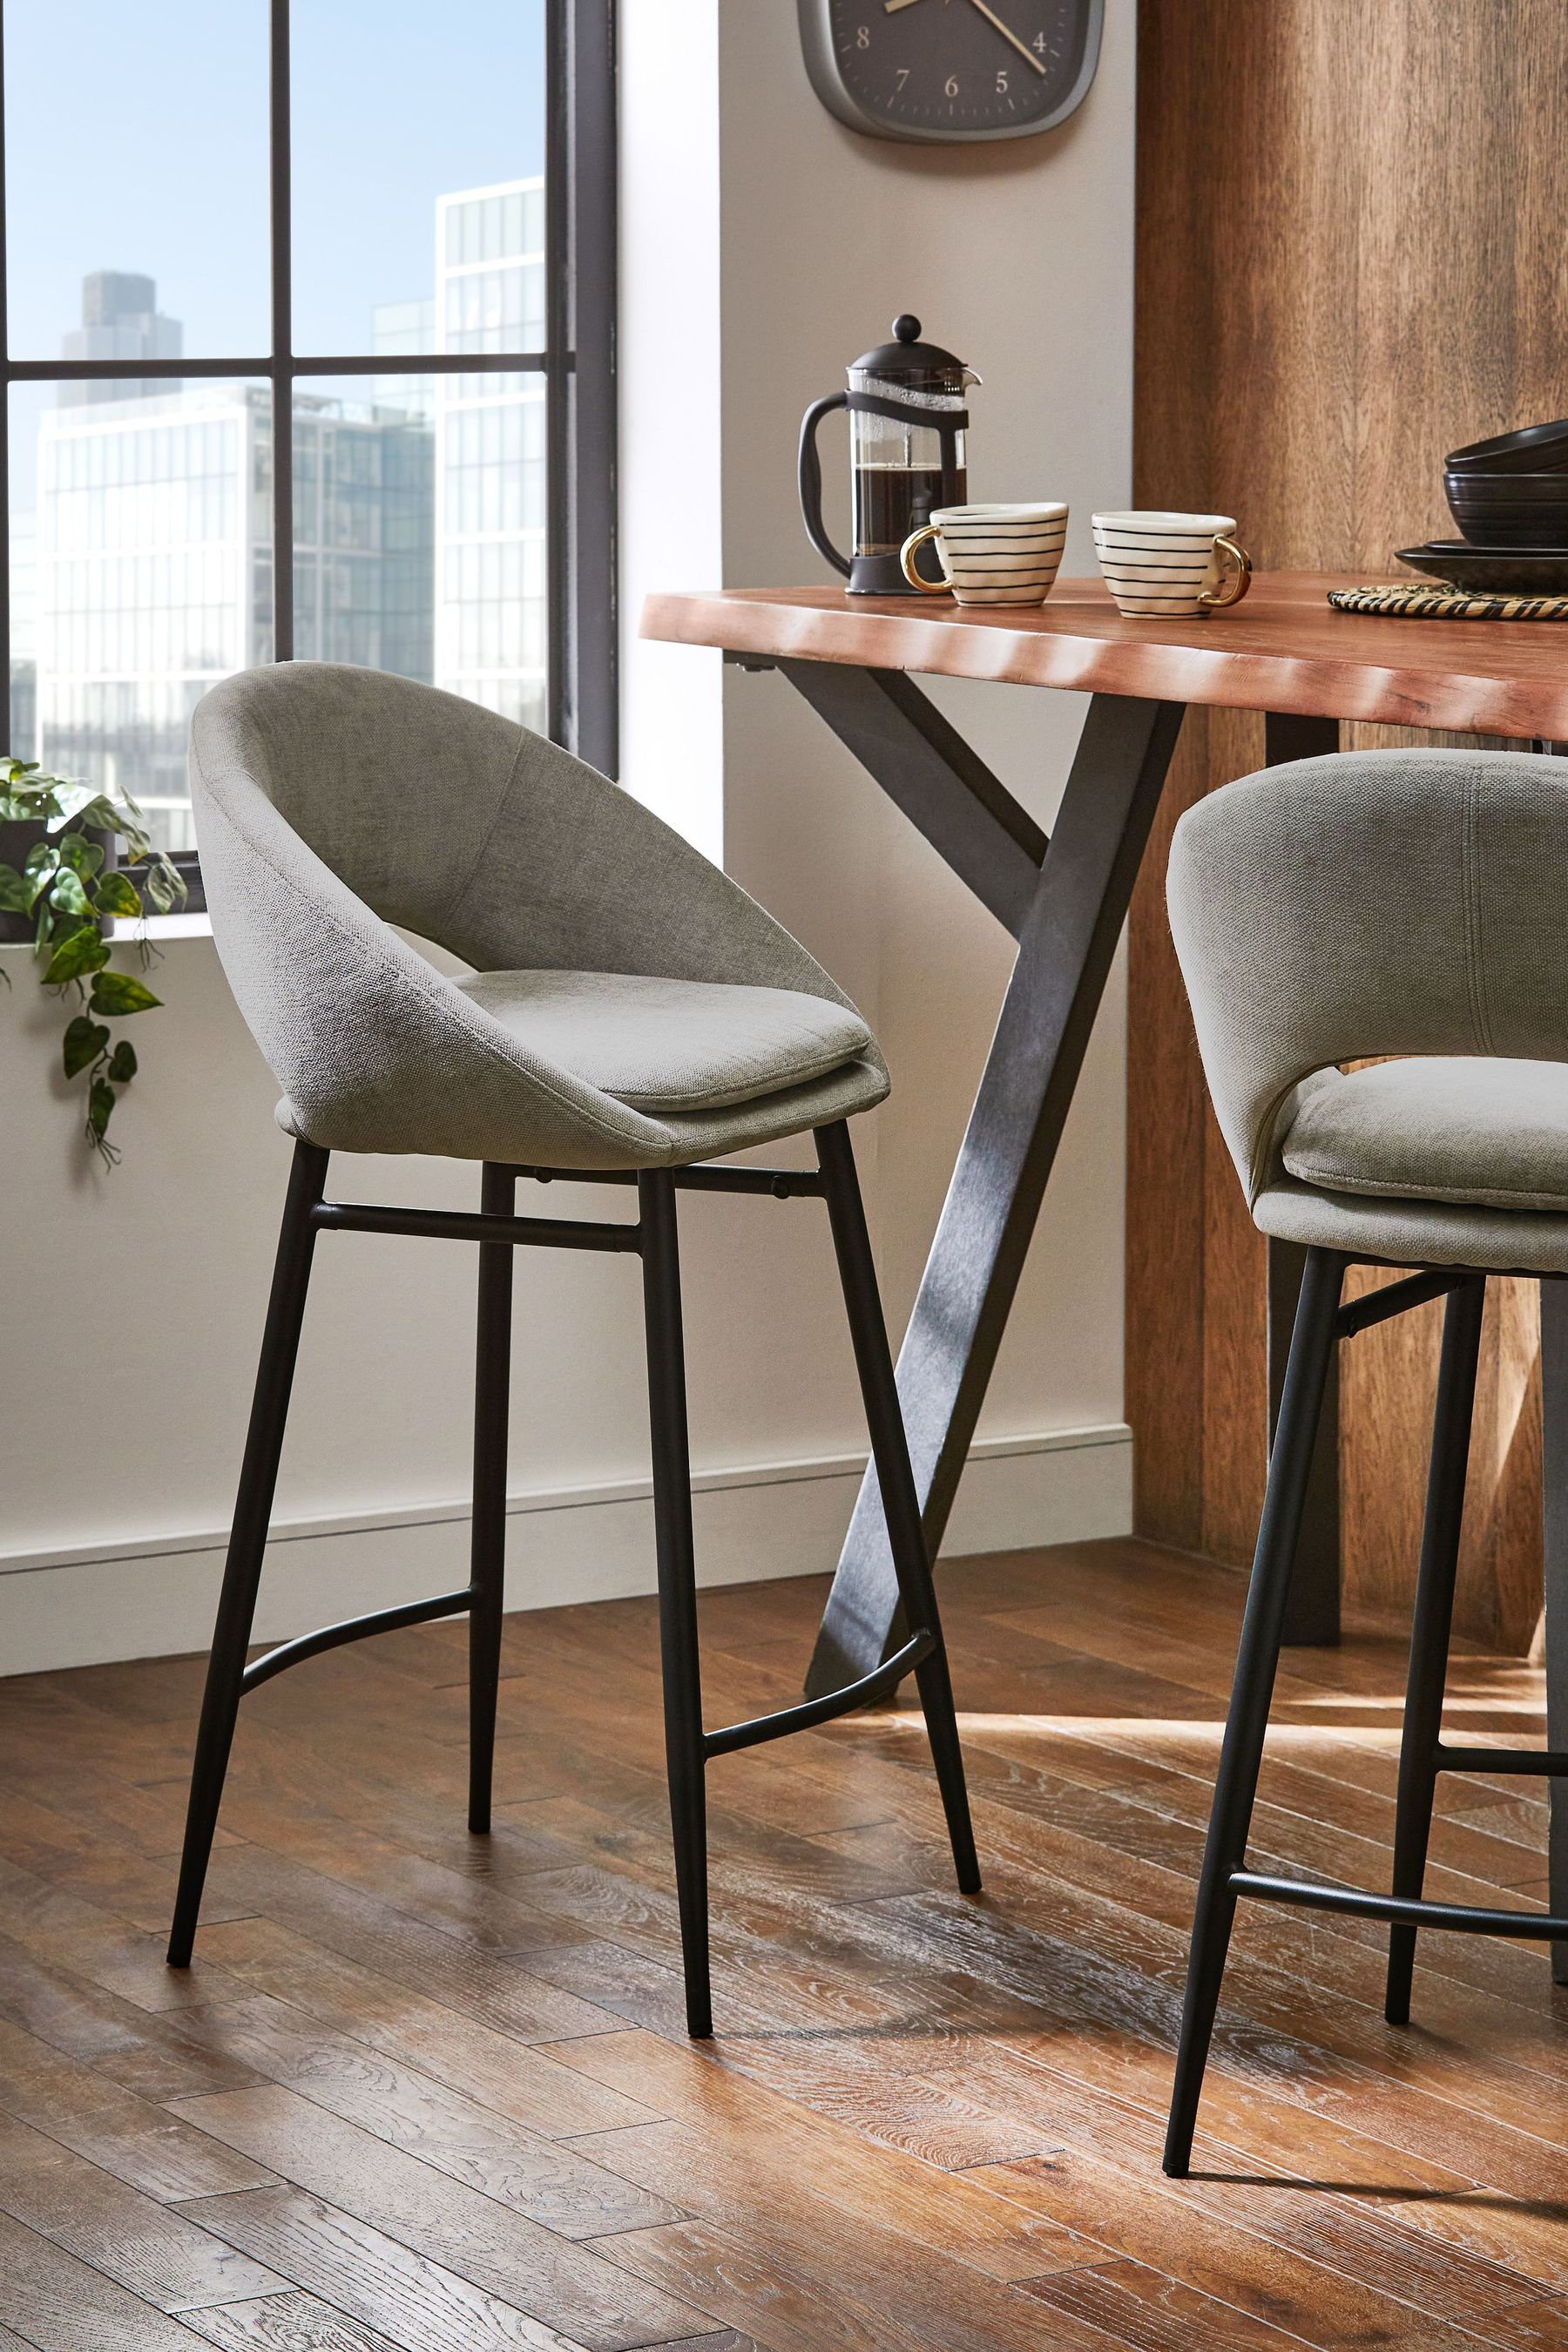 Swivel bar stools with back and arms  ideas you will love